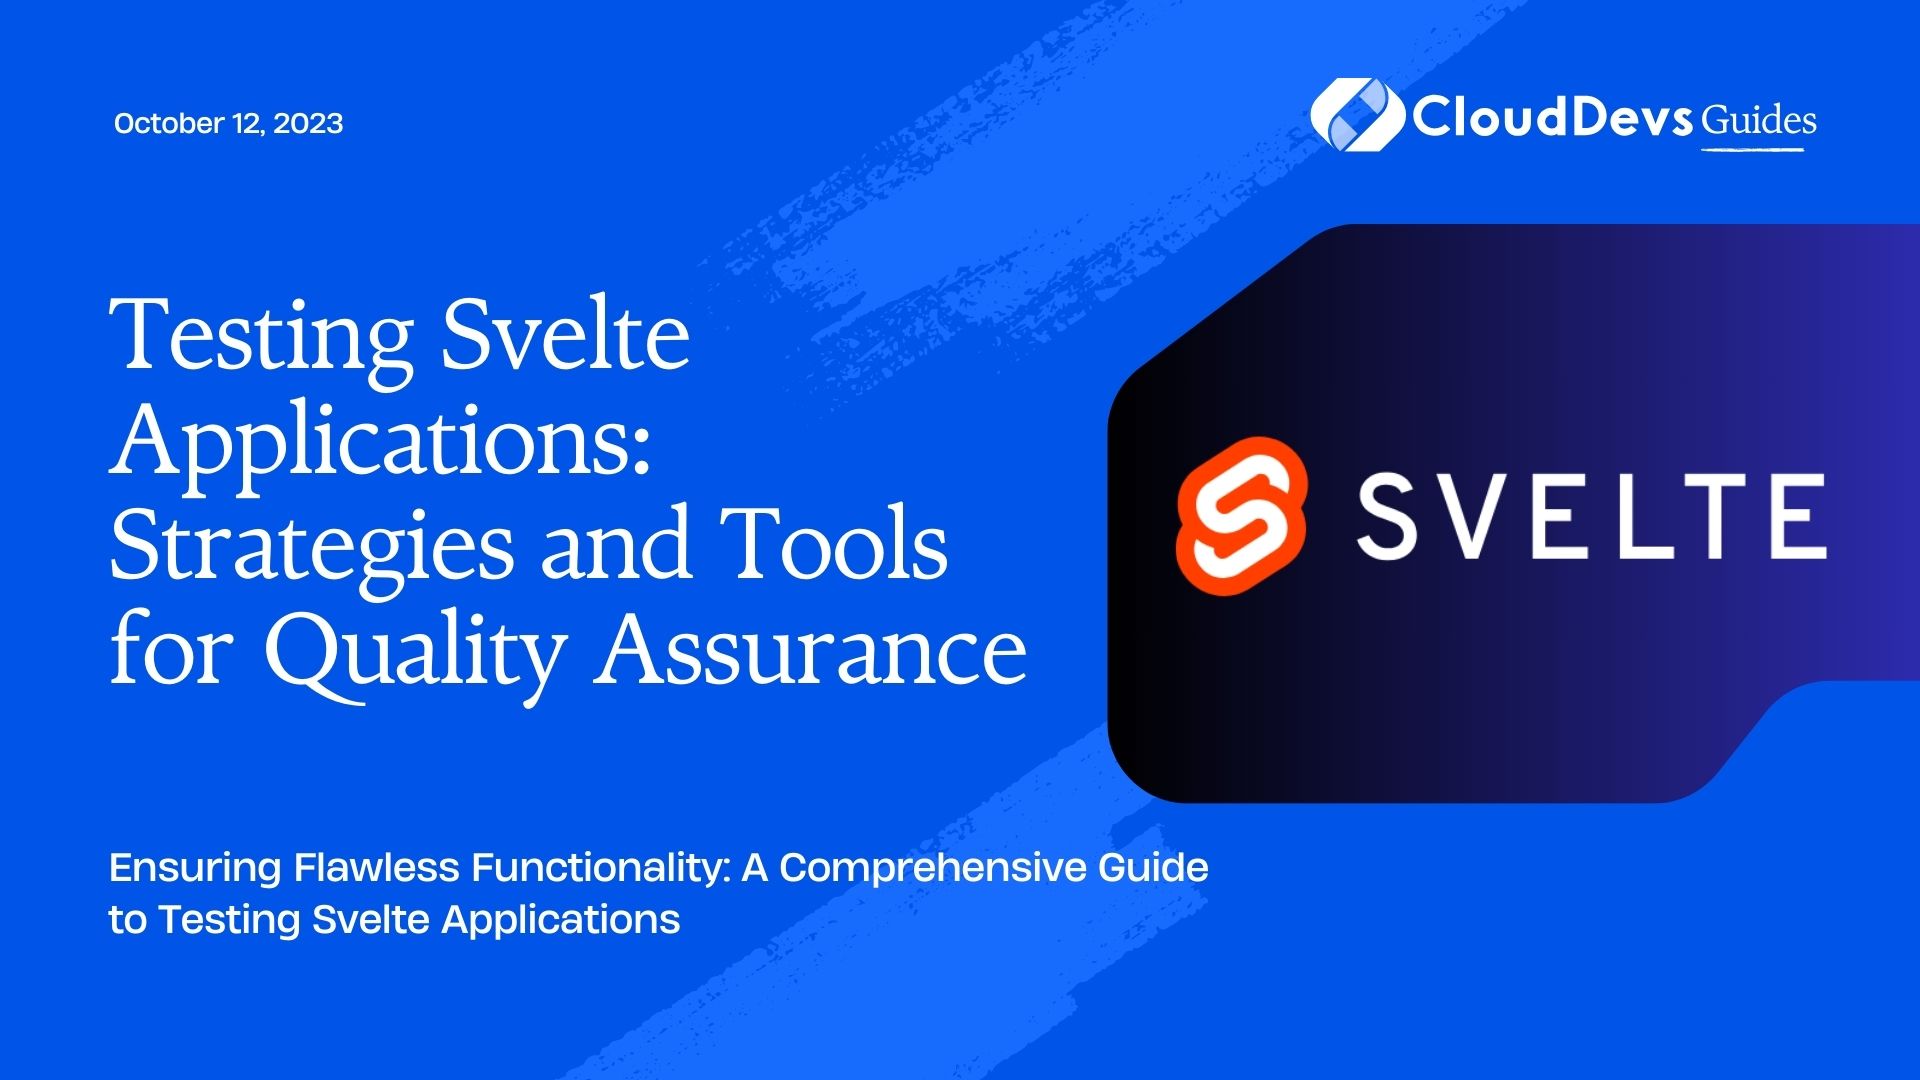 Testing Svelte Applications: Strategies and Tools for Quality Assurance